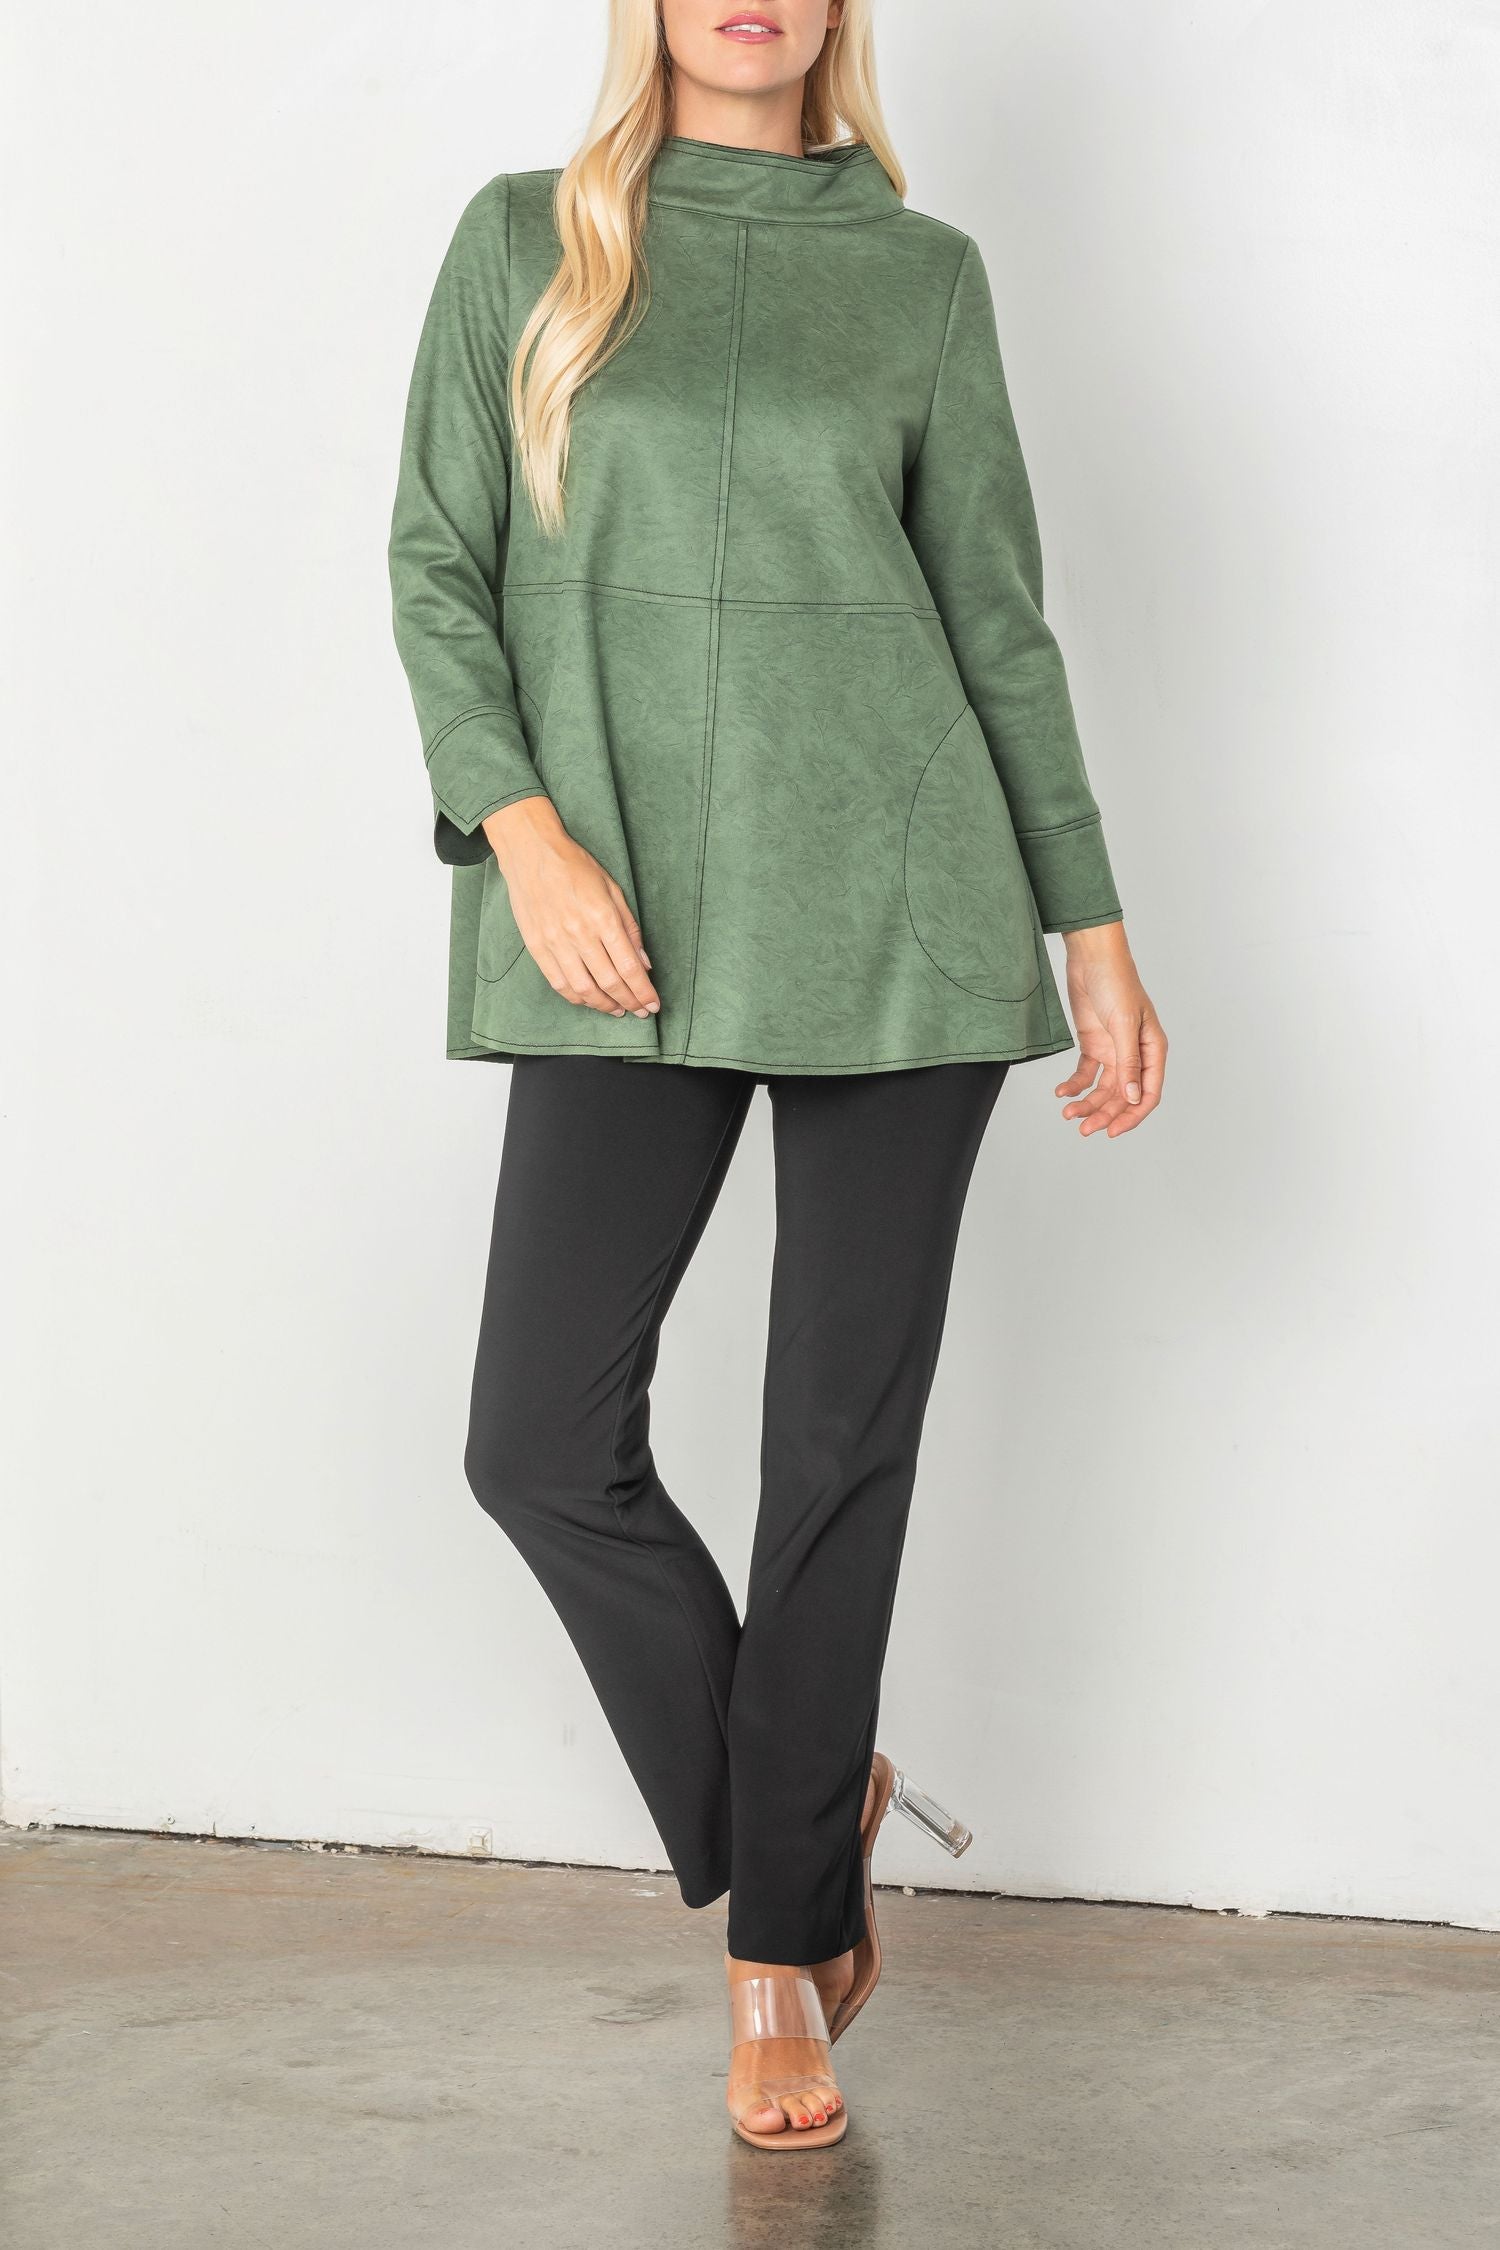 Green High Neck Contrast Stitching Top